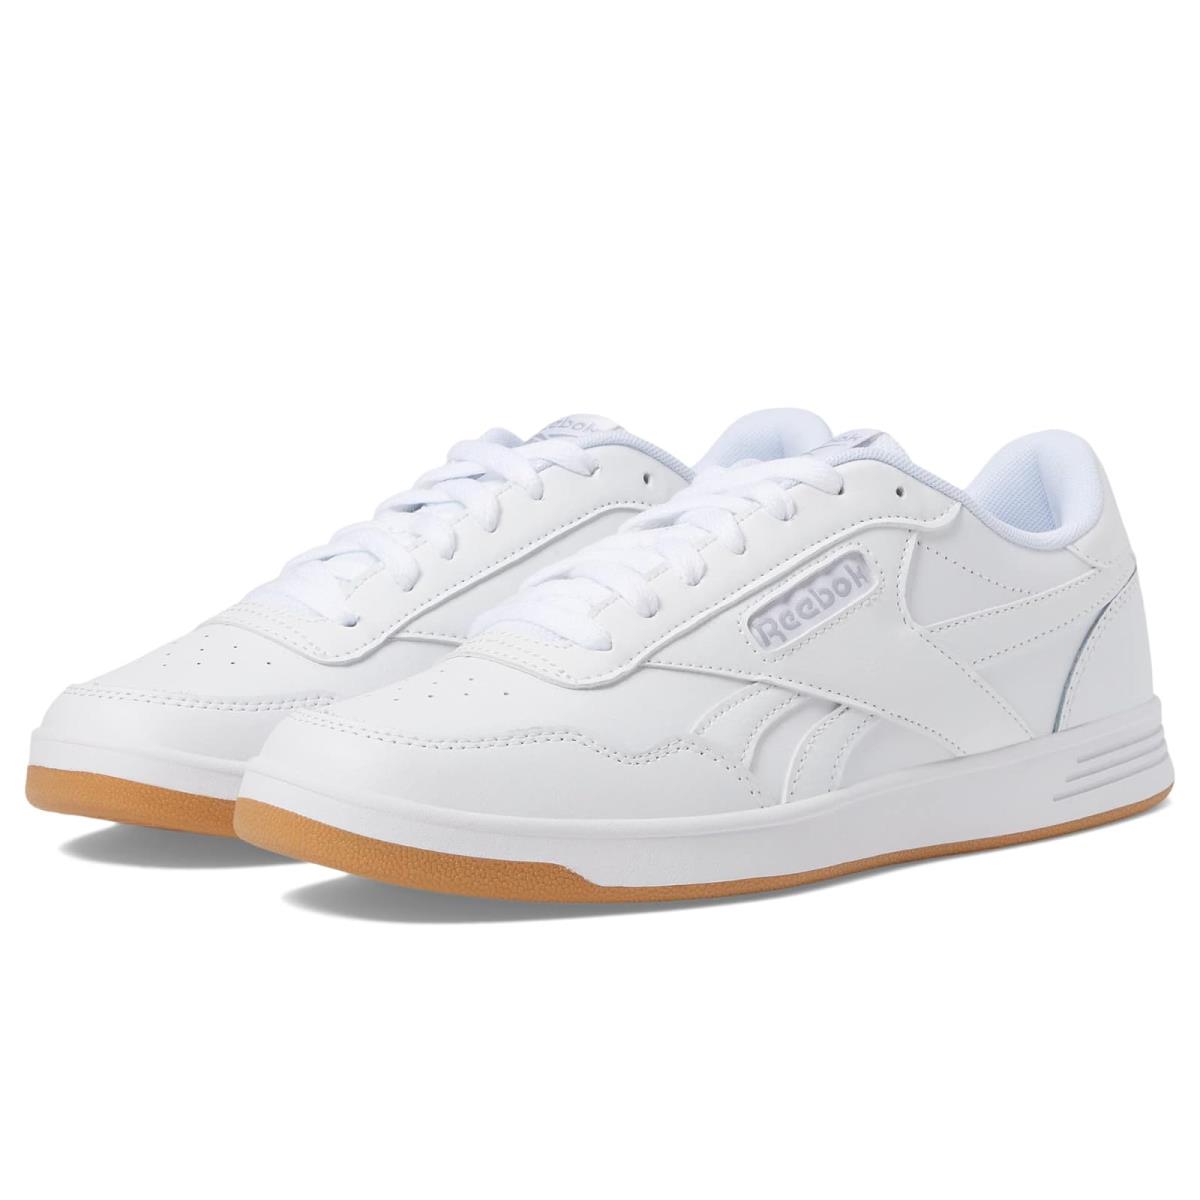 Unisex Sneakers Athletic Shoes Reebok Court Advance White/Cold Grey/Gum